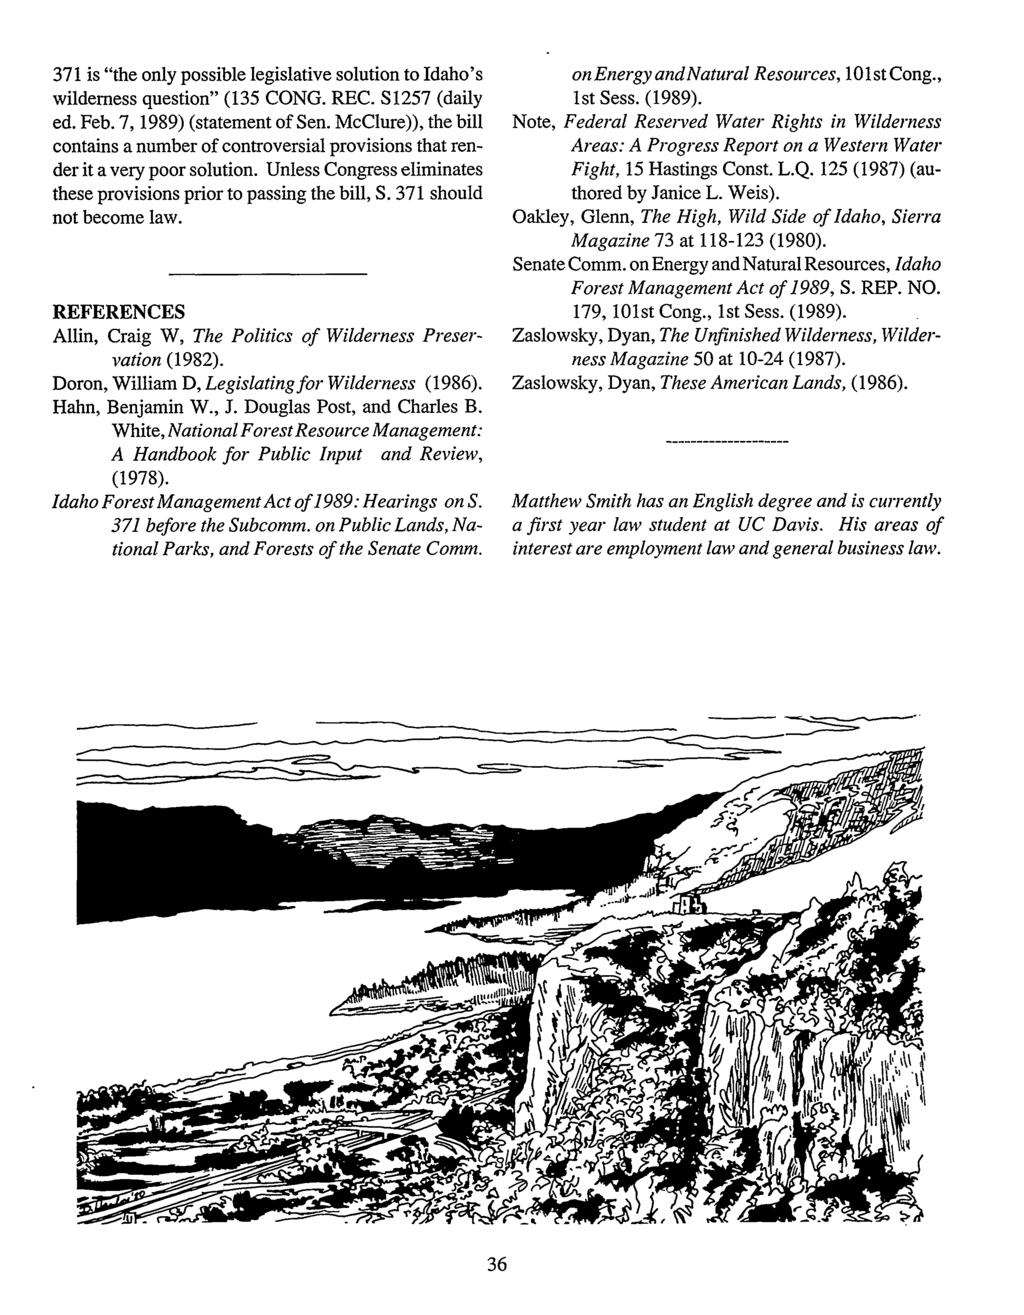 371 is "the only possible legislative solution to Idaho's wilderness question" (135 CONG. REC. S1257 (daily ed. Feb. 7, 1989) (statement of Sen.